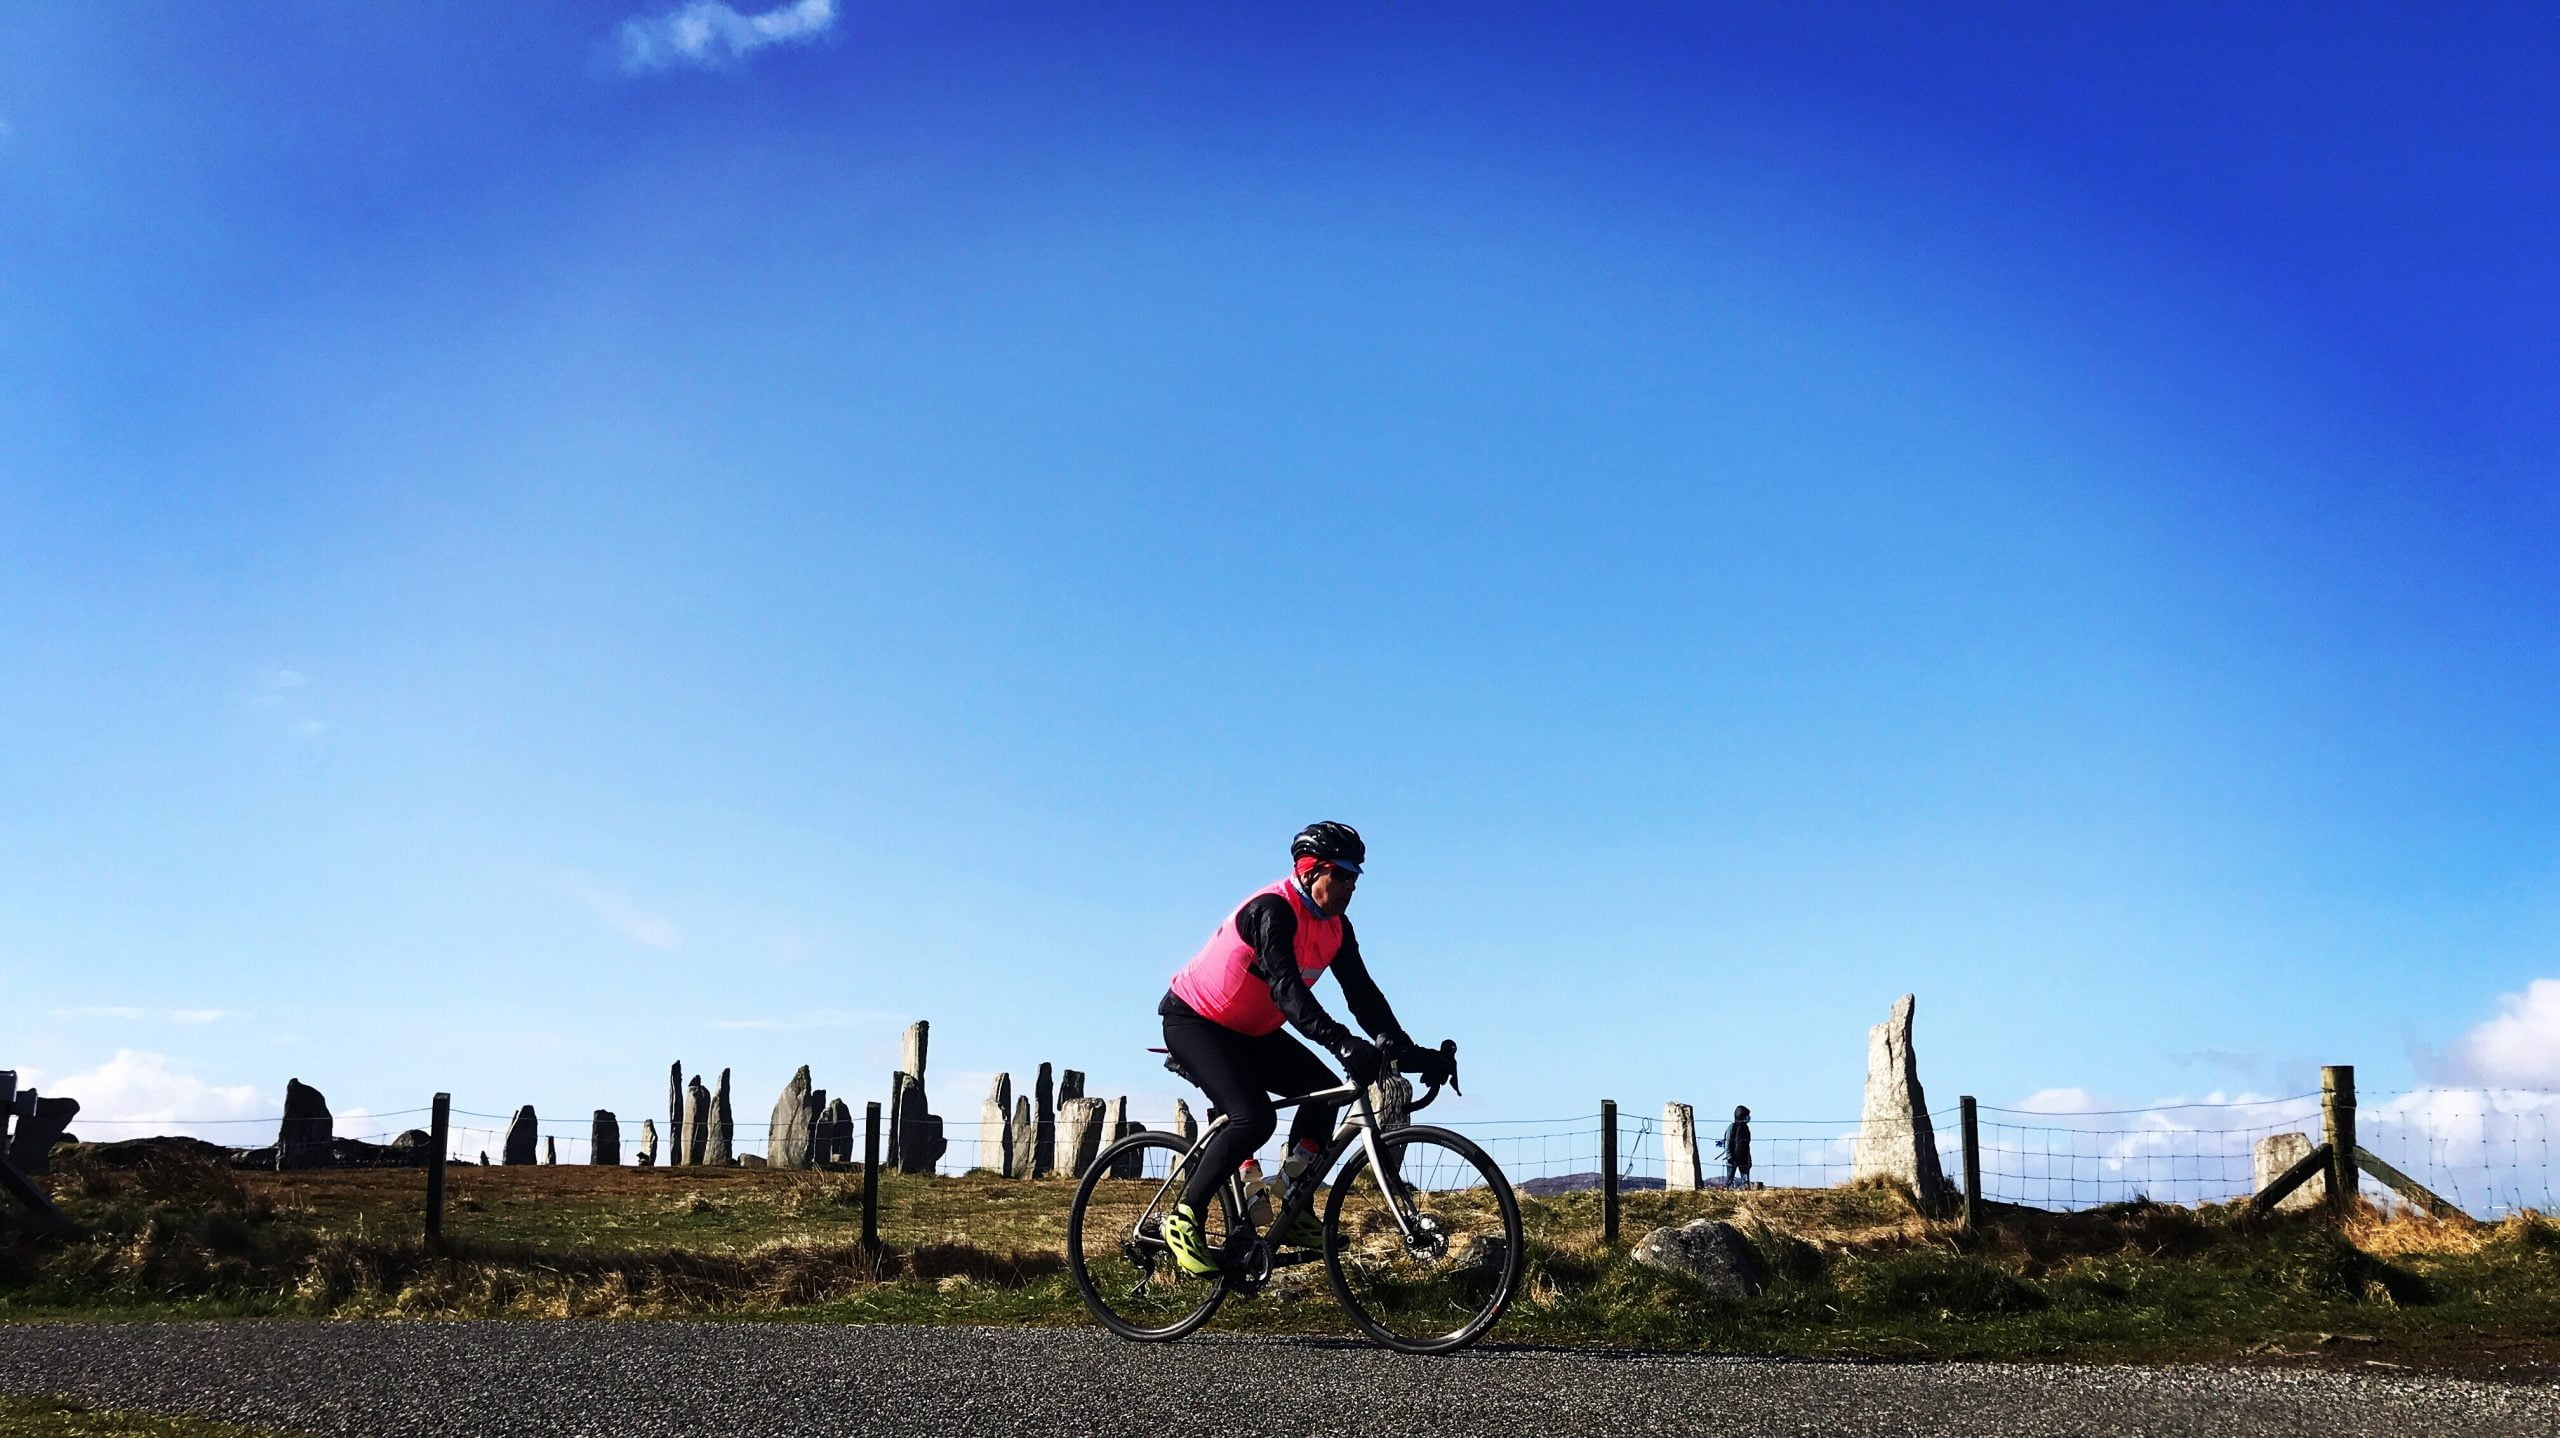 Cycling past the Callanish Standing Stones, an ancient monument on Lewis
The Hebridean Way - Cycling from Barra to the Butt of Lewis